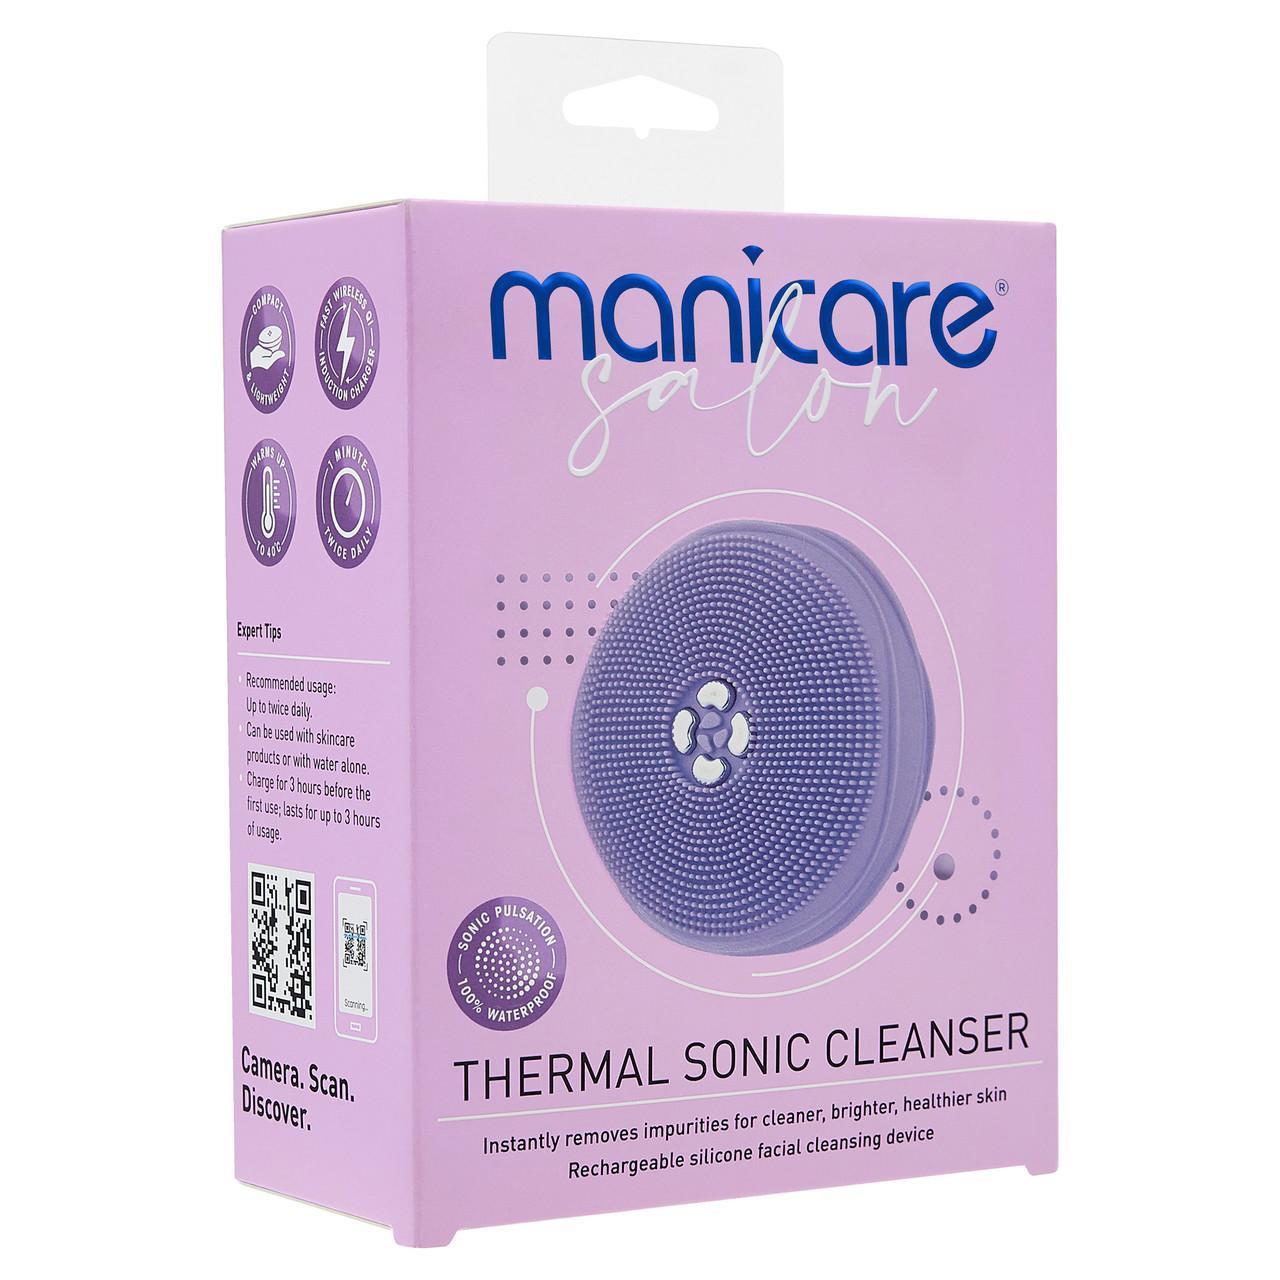 Manicare(R) Salon Thermal Sonic Cleanser